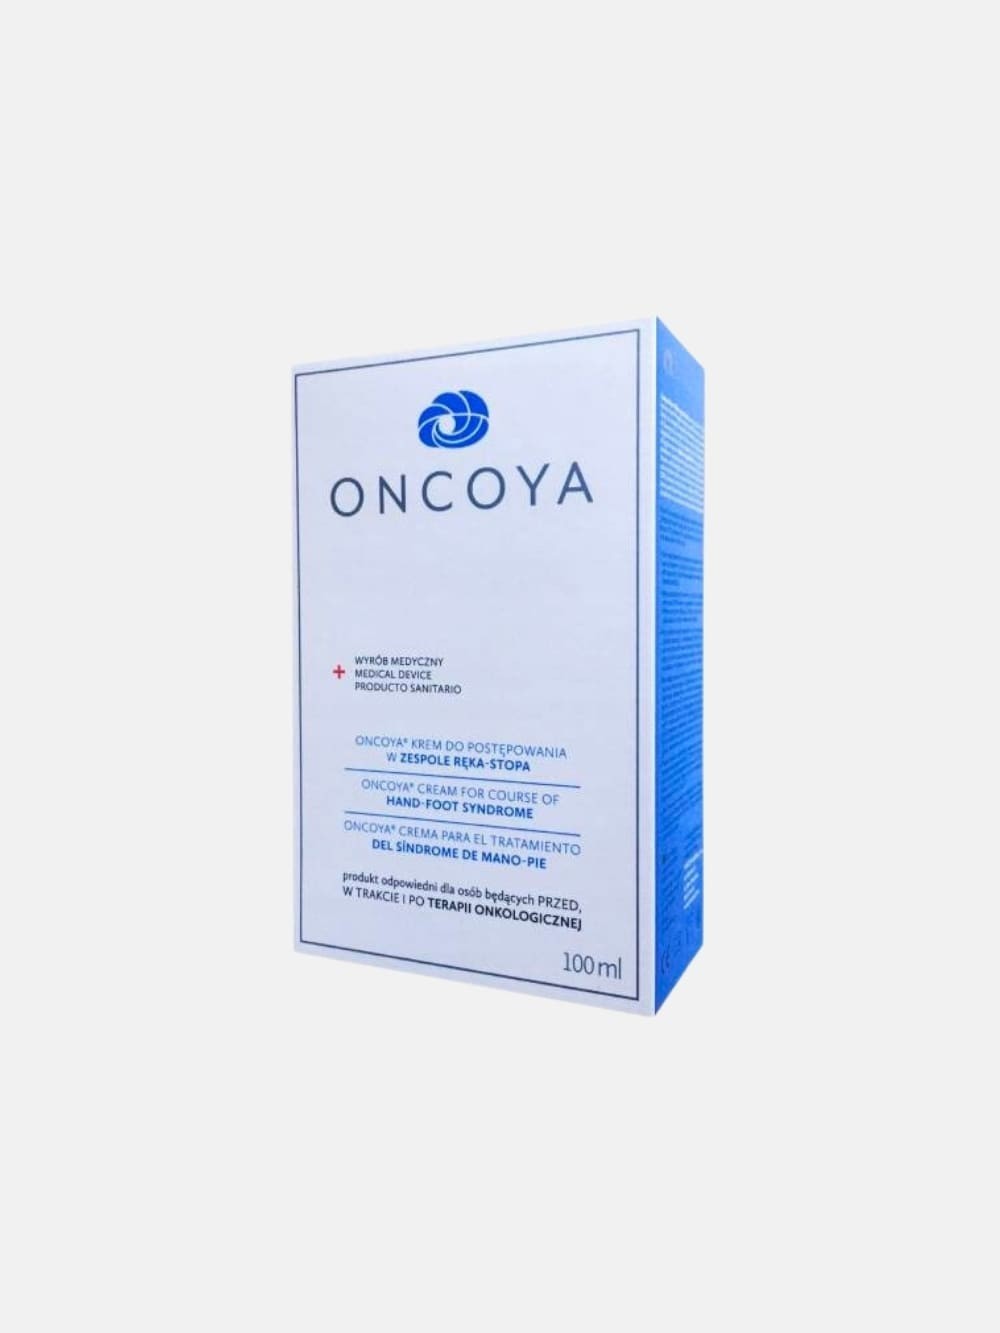 Oncoya cream for the management of hand-foot syndrome - Shop online